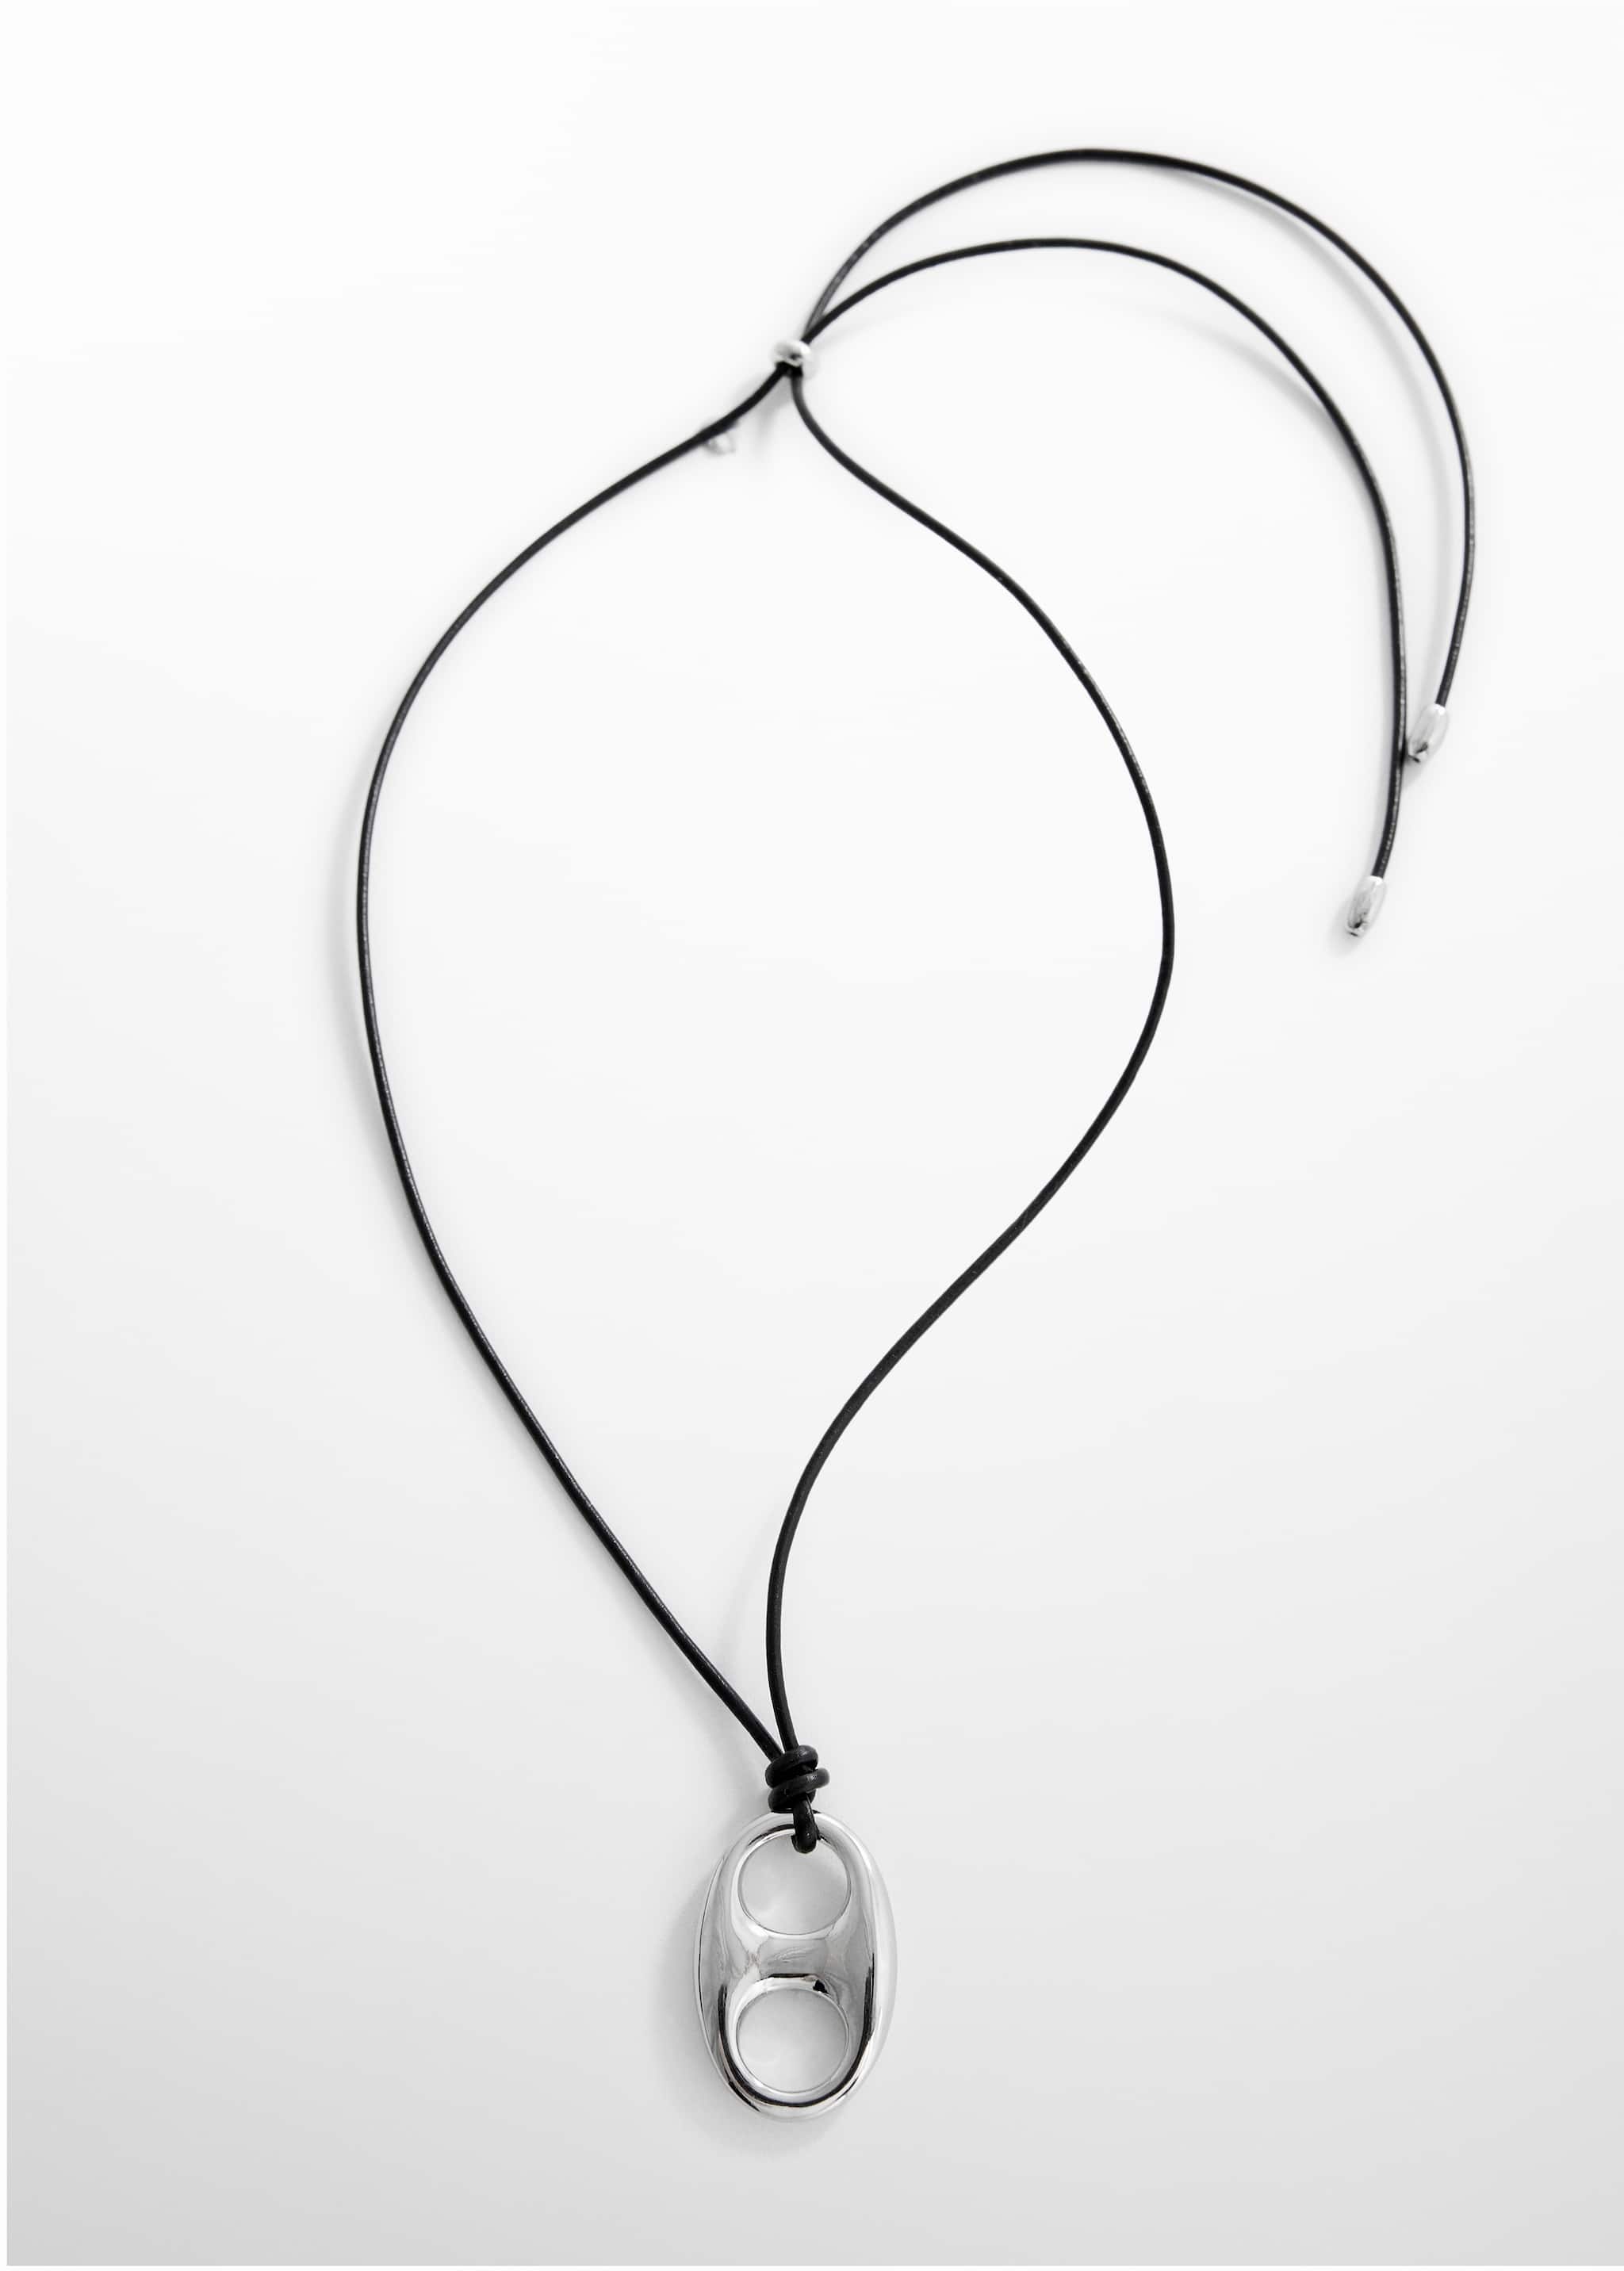 Metal pendant necklace - Article without model